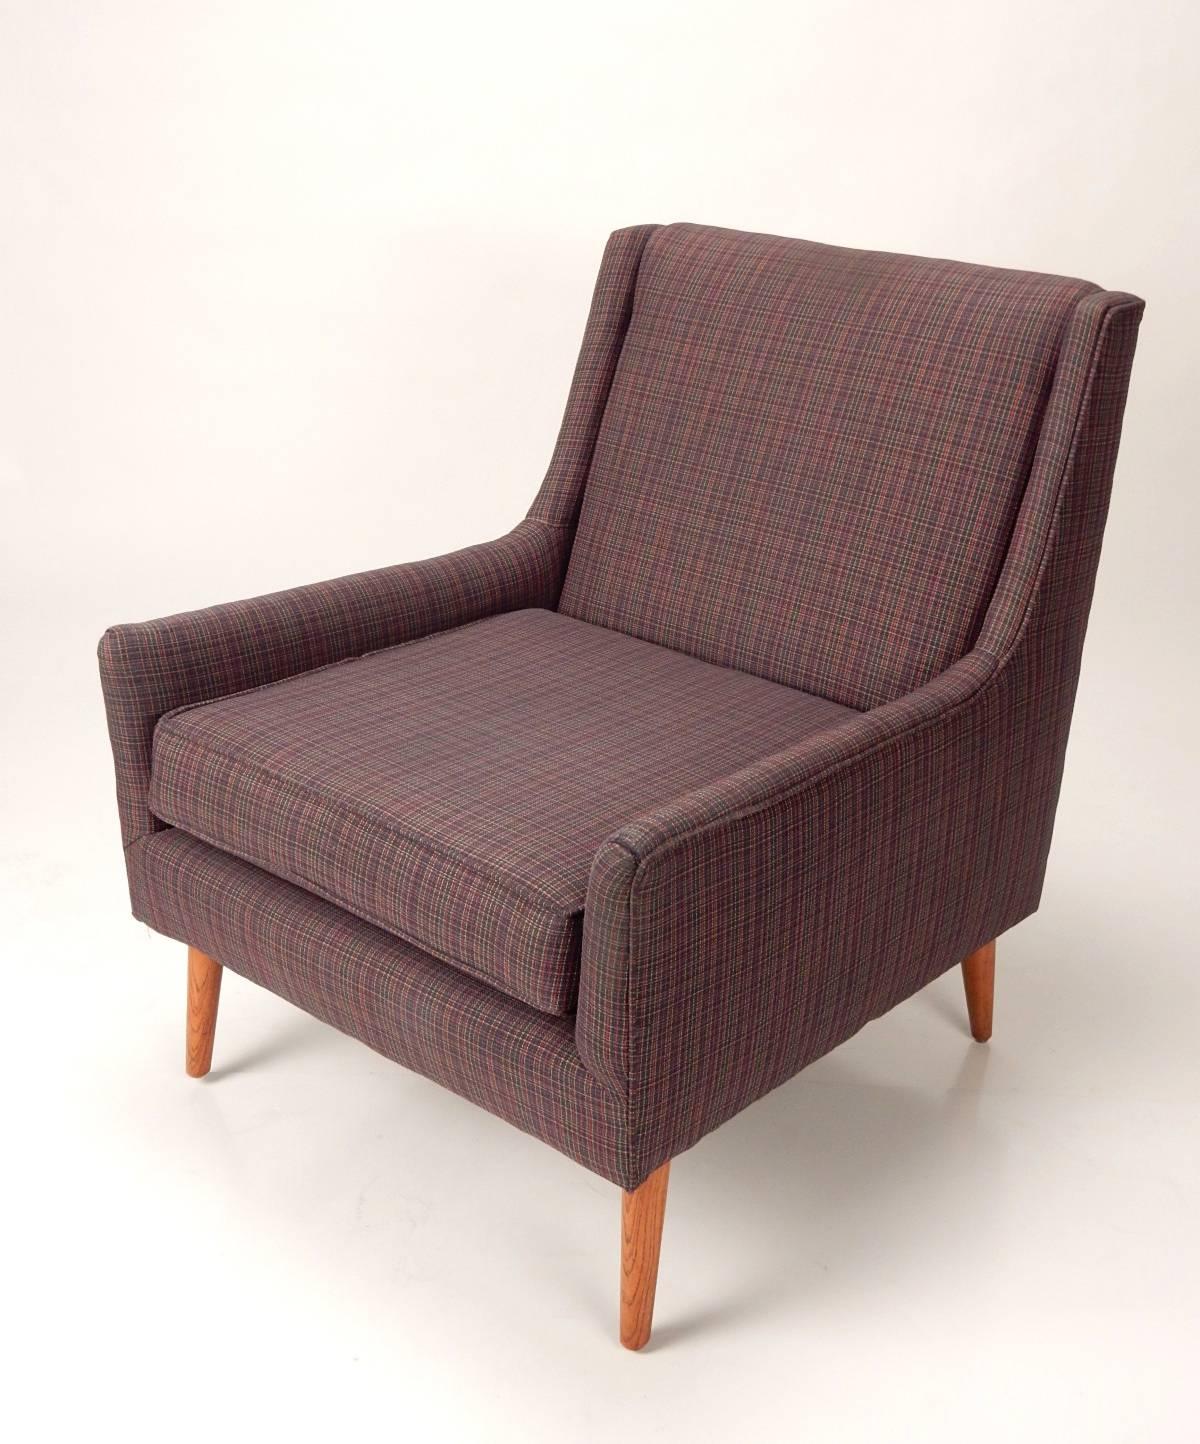 Elegant angular lounge chairs-pair, circa 1950s
Very nice quality, in the style of Edward Wormley/Dunbar.
Not marked. Super comfortable in a durable plaid.